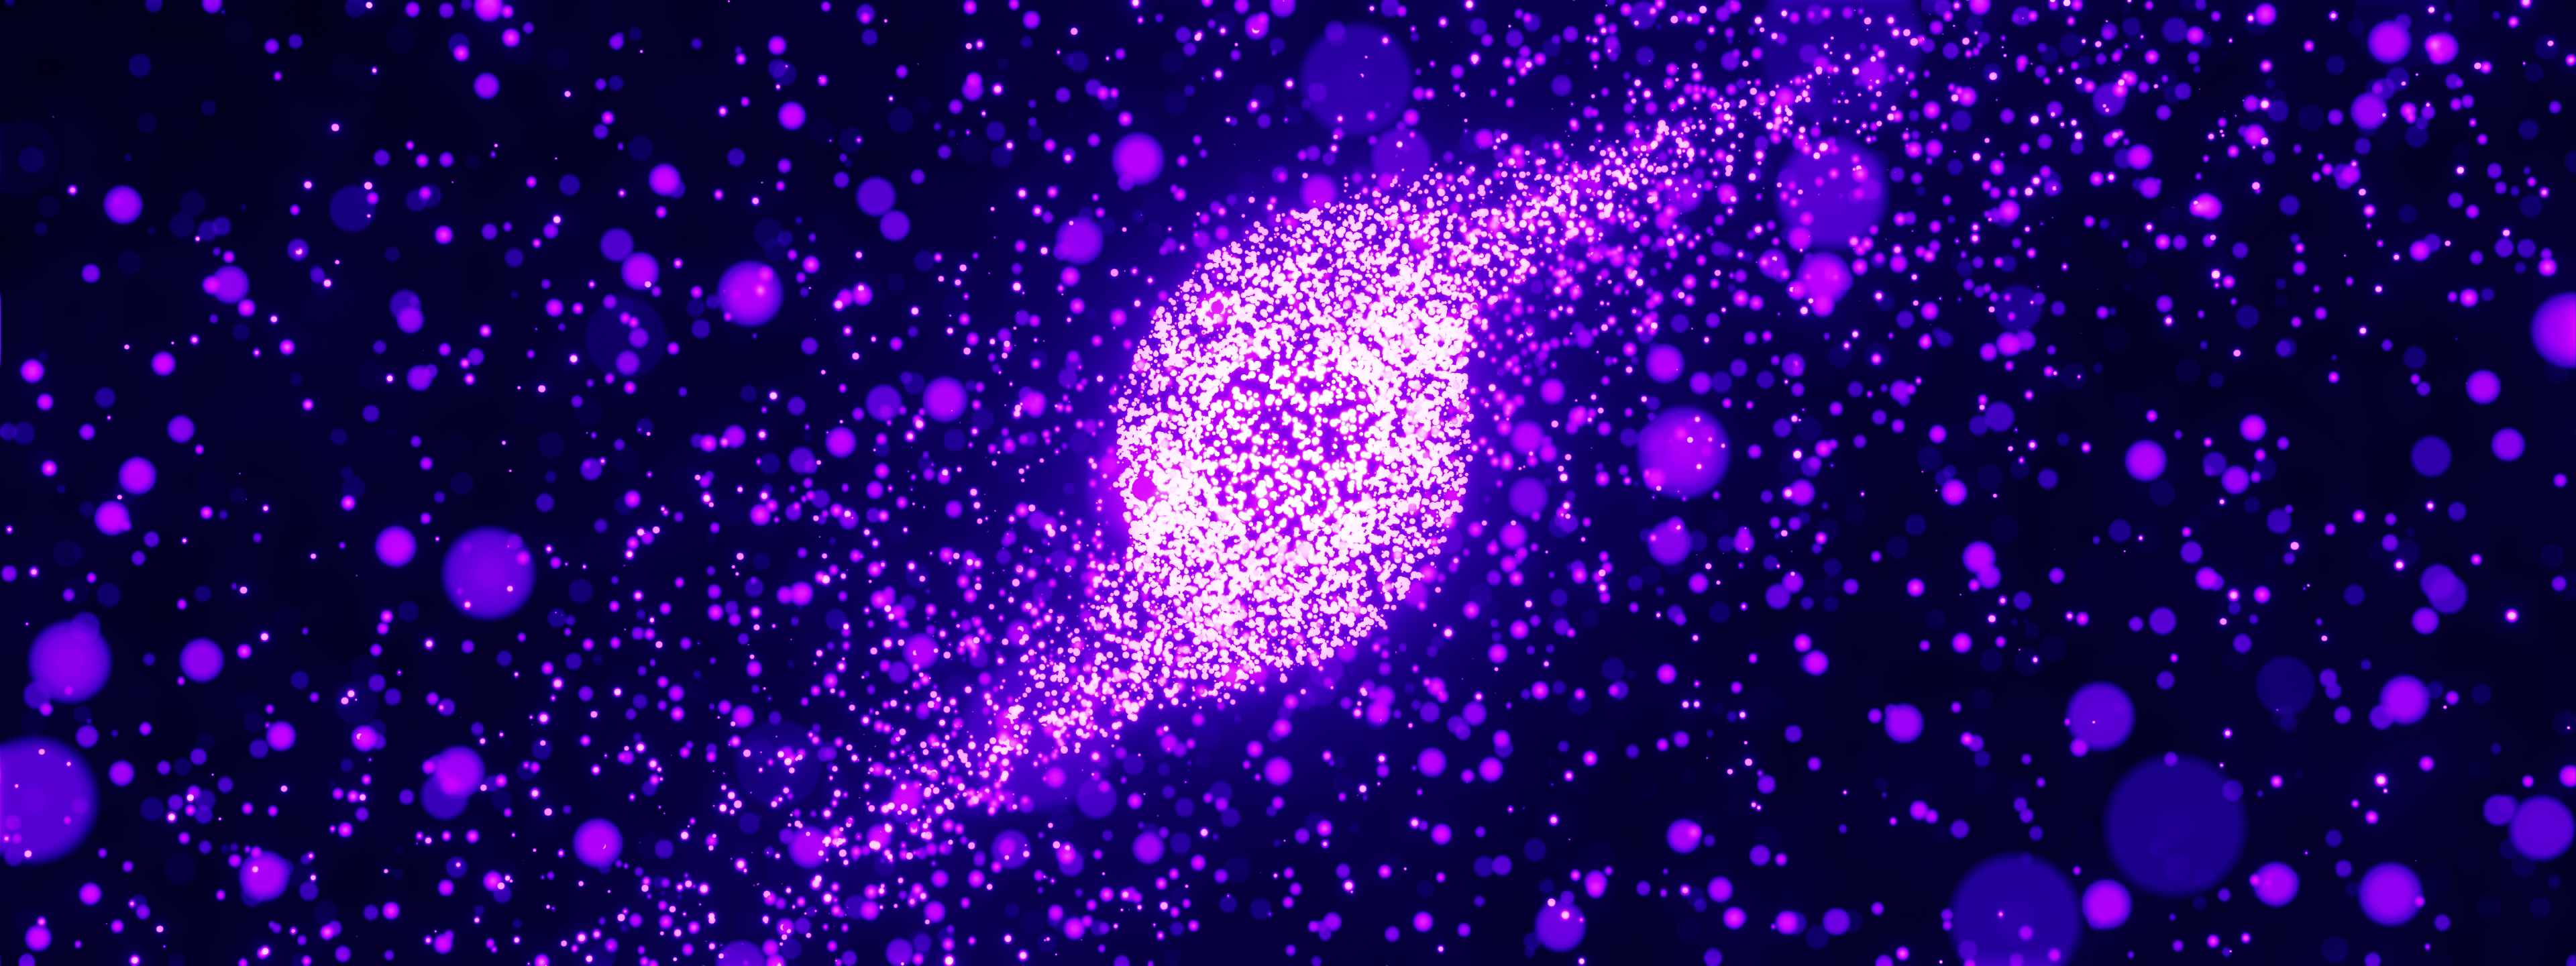 Space Blender Render Floating Particles CGi Digital Art Photoshop 3D Graphics 3D Abstract 3840x1440